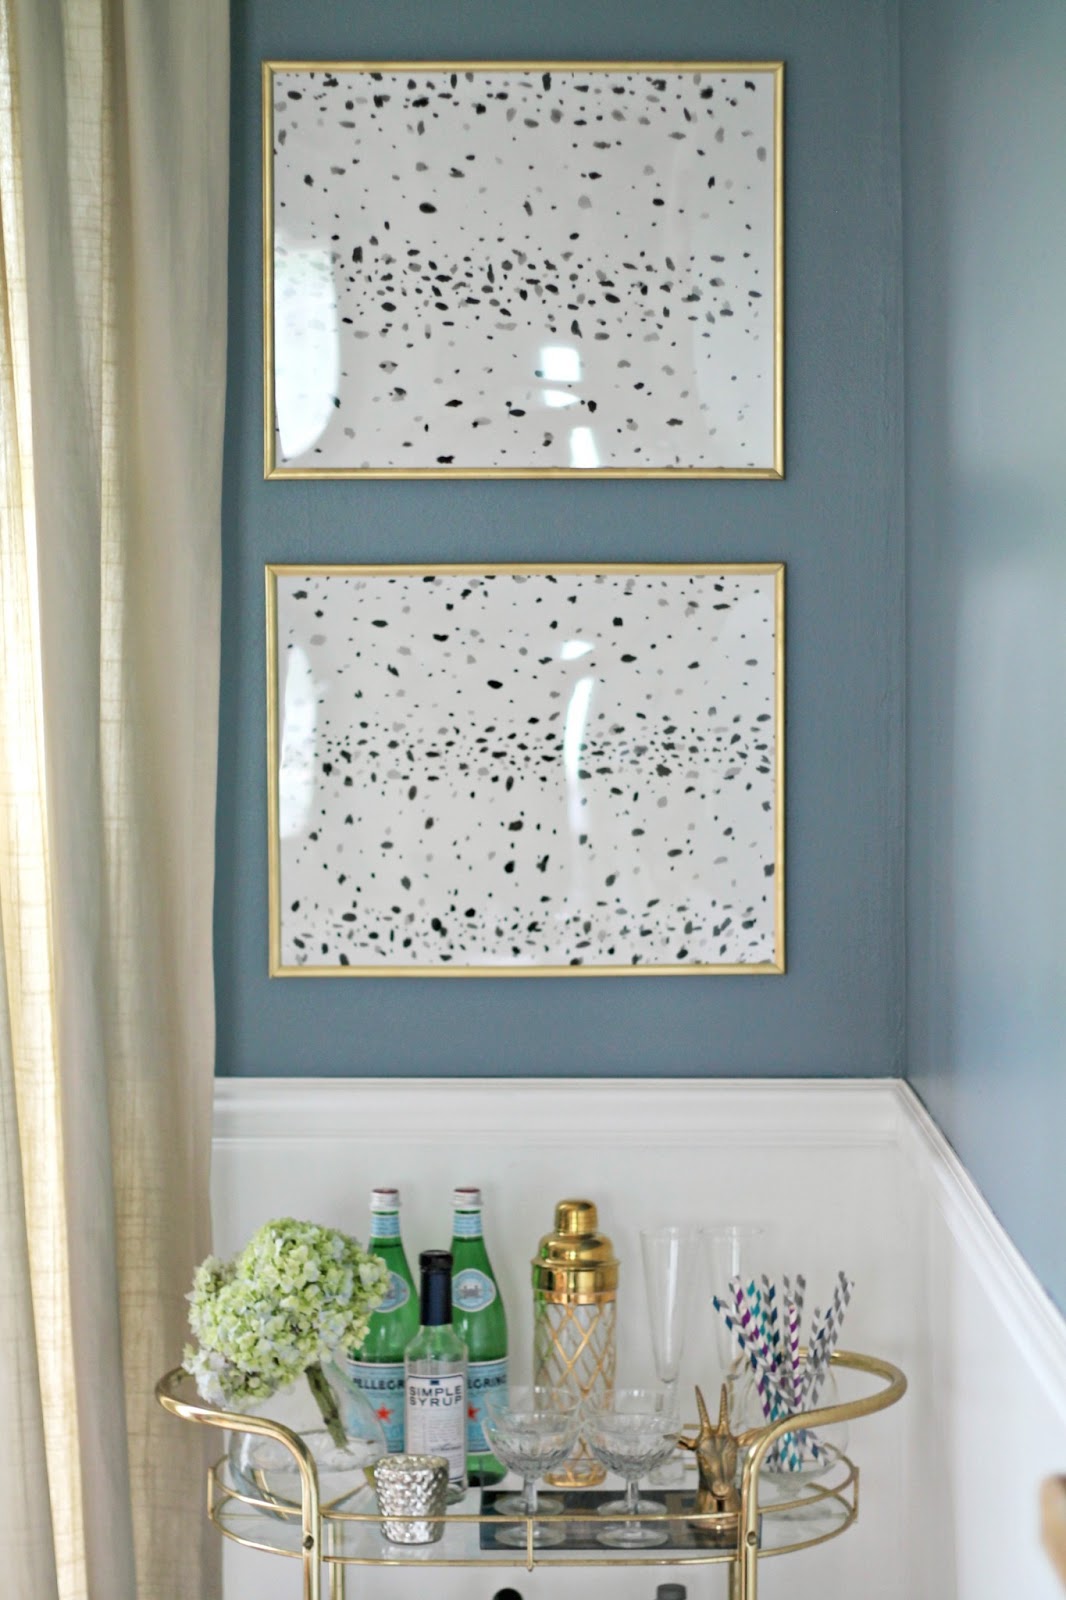 DIY Black and White Spotted Art Shannon Claire